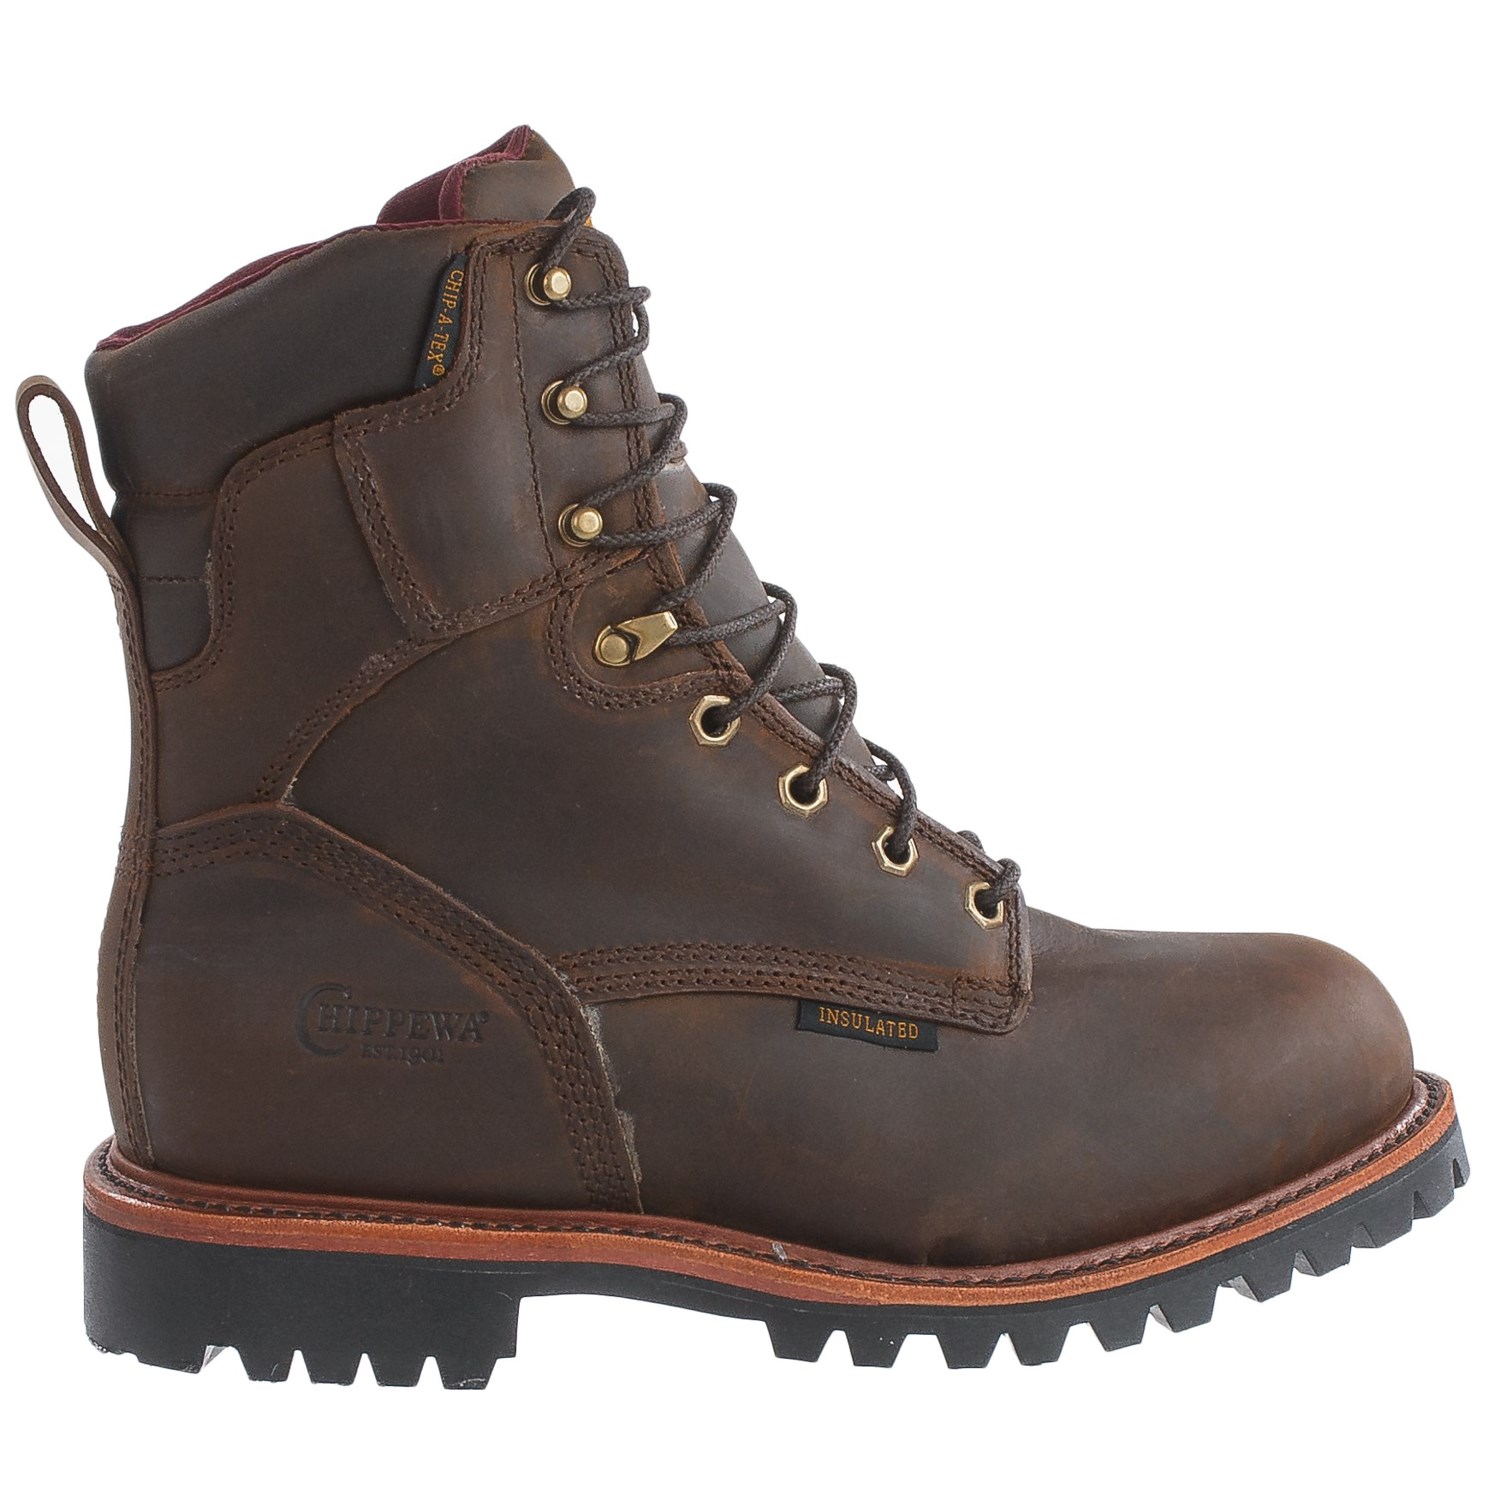 Chippewa Bay Crazy Horse Leather Work Boots (For Men) - Save 40%